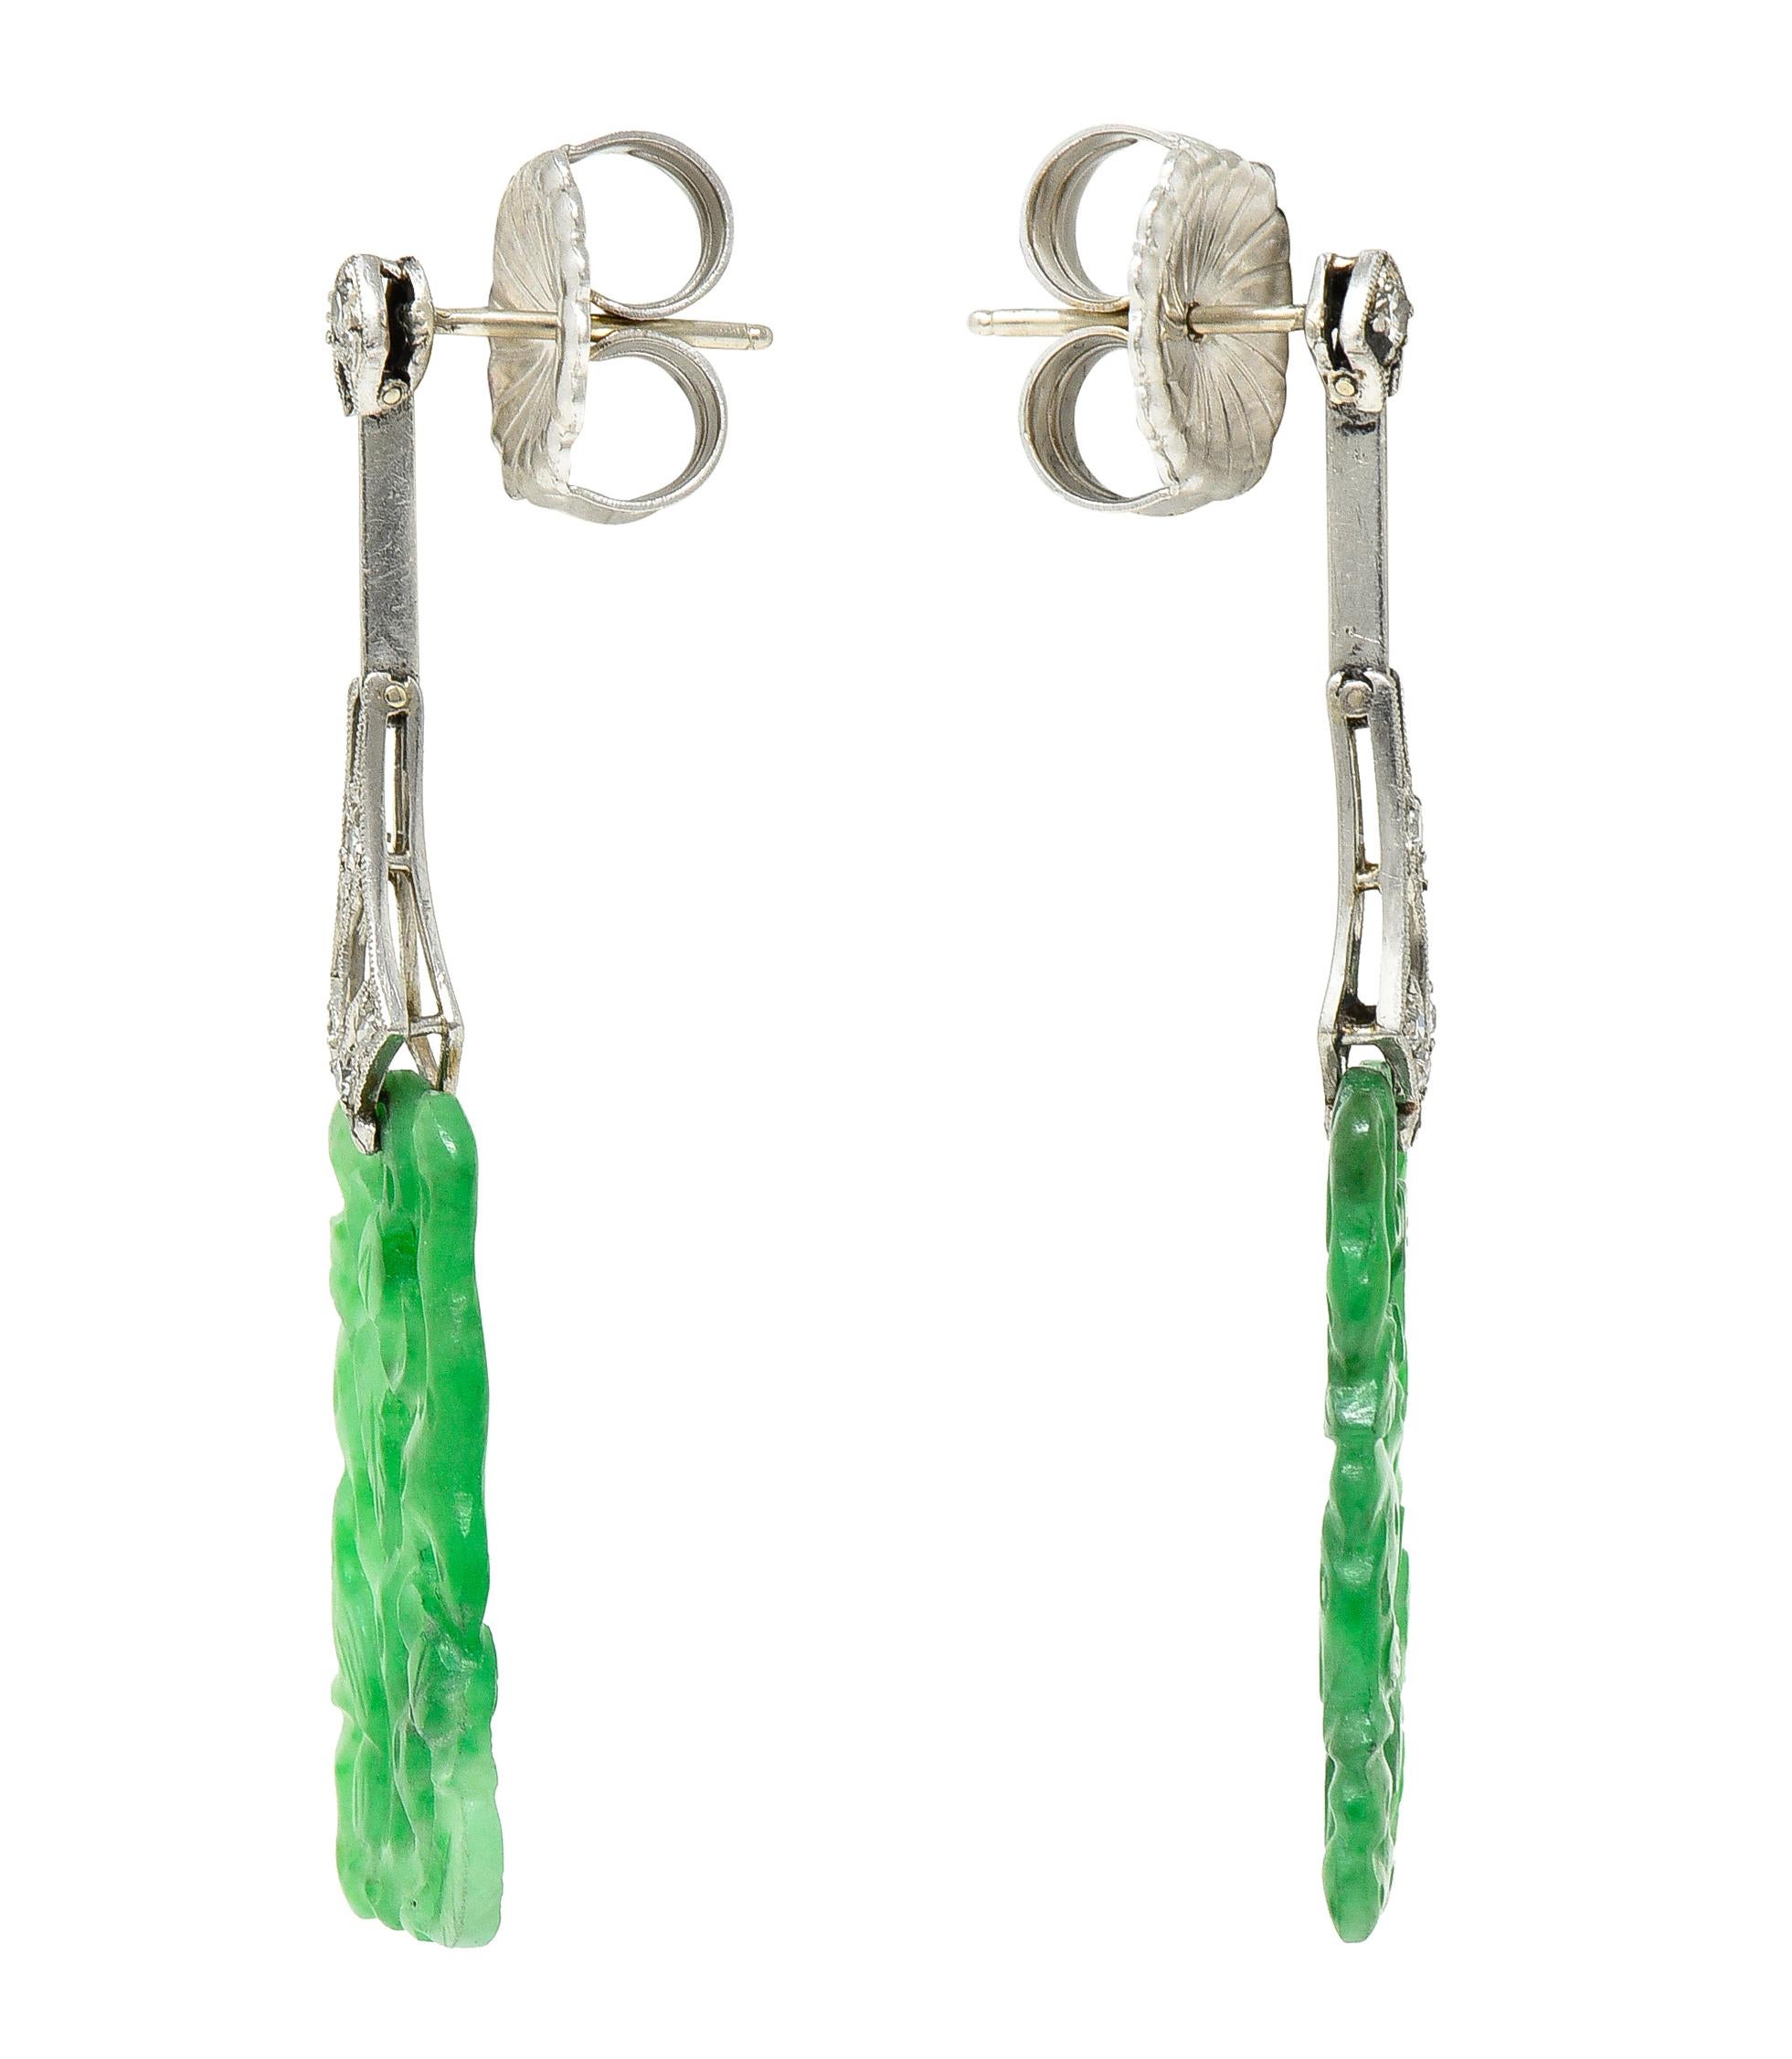 Featuring tapered rectangular shaped carved jade drops depicting foliage and birds. Measuring 9.5 x 21.0 mm - translucent light bluish-green to medium green in color. Suspending from pierced platinum surmounts - hinged to articulate. Featuring